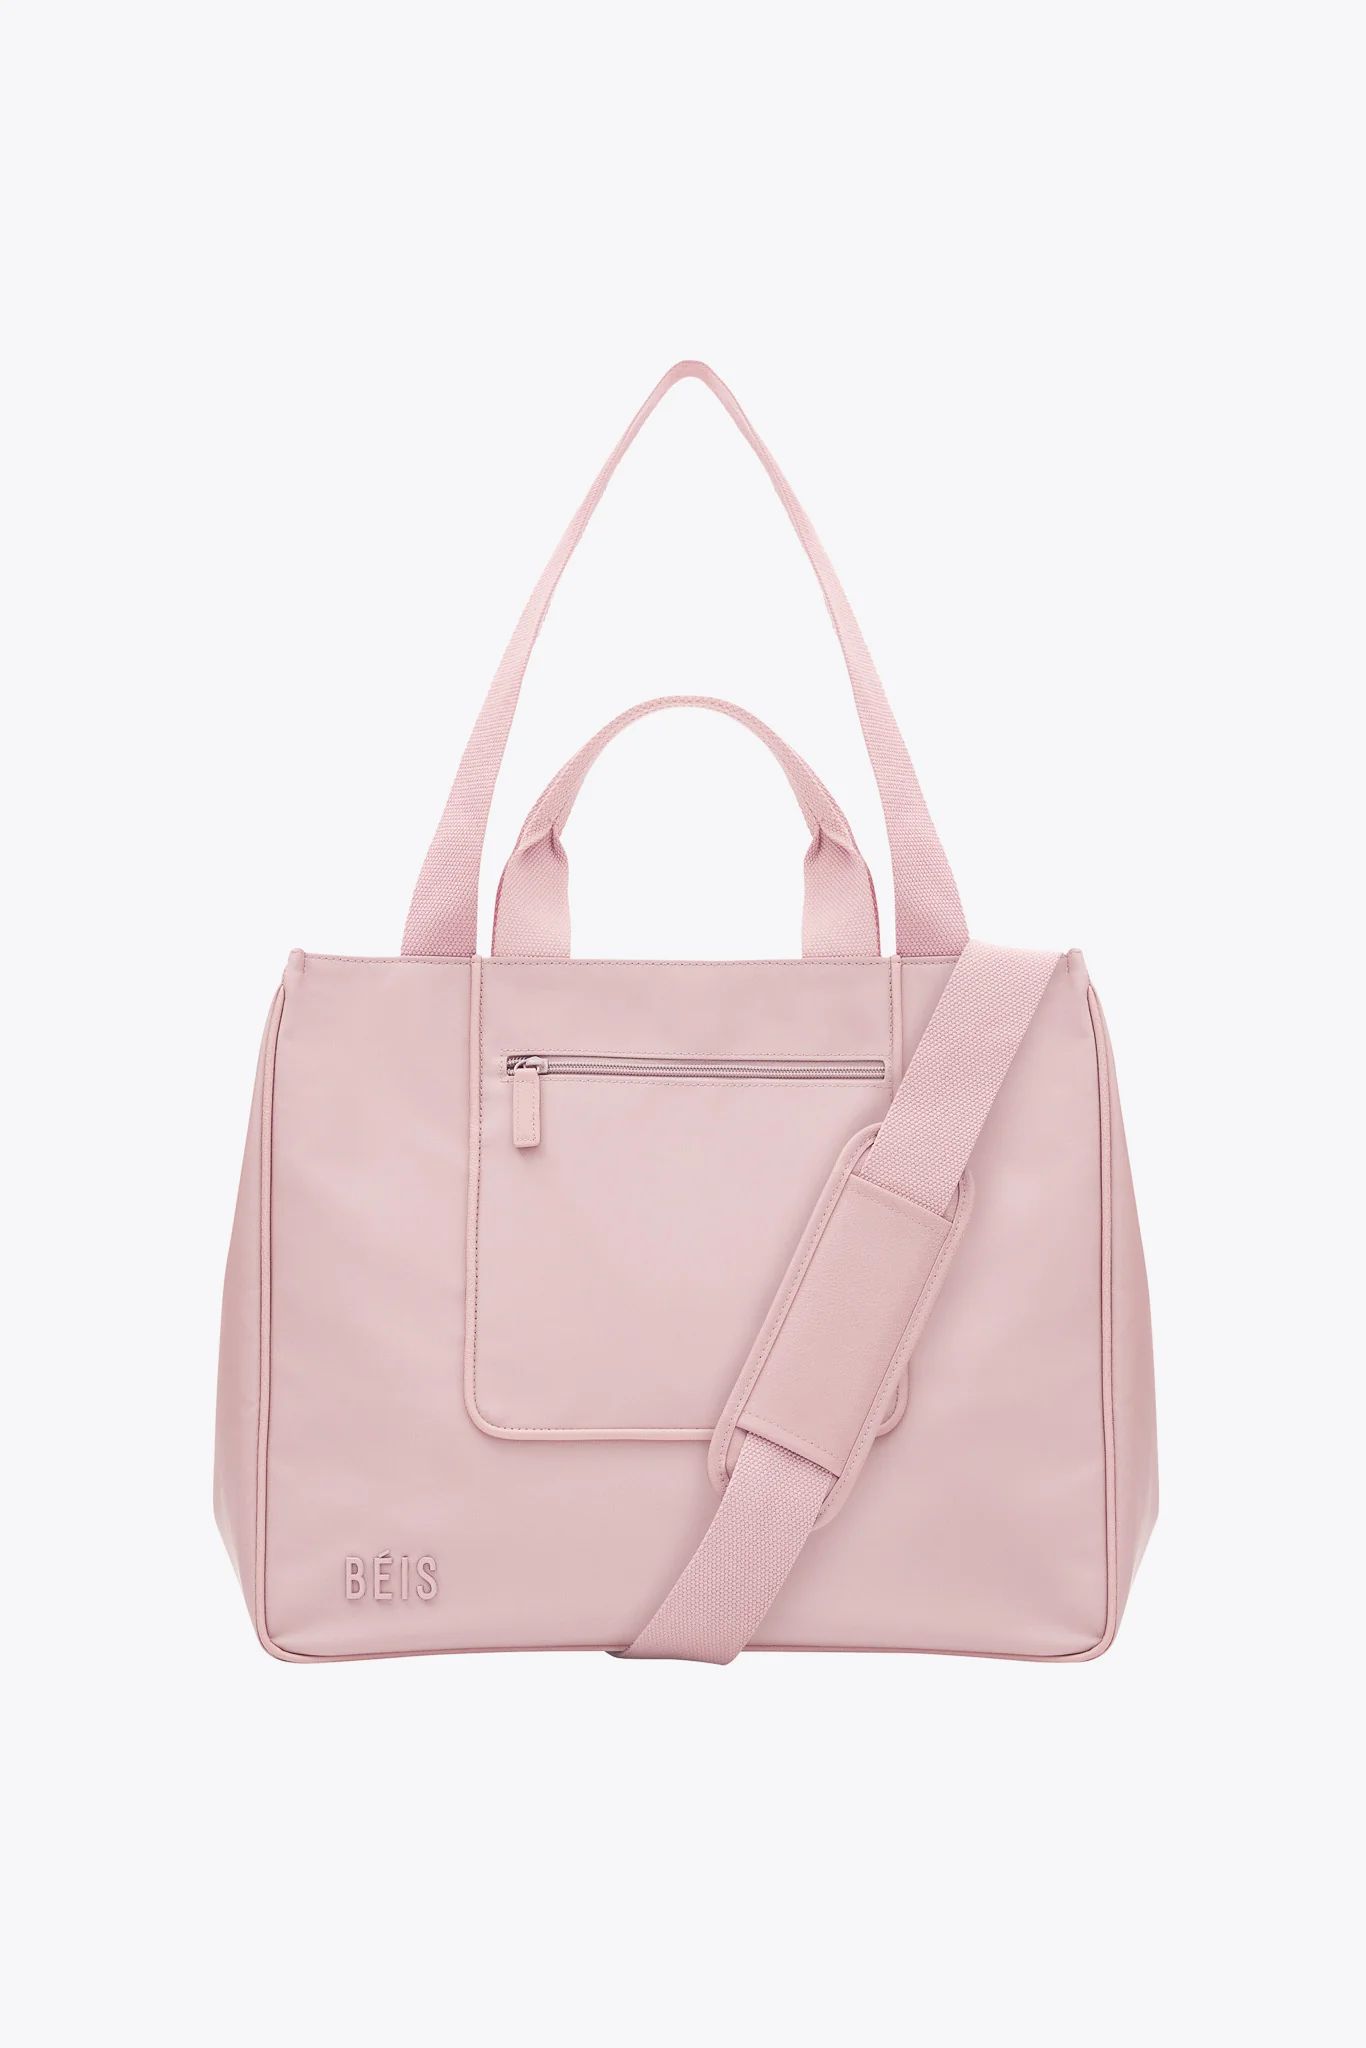 The East To West Tote in Atlas Pink | BÉIS Travel